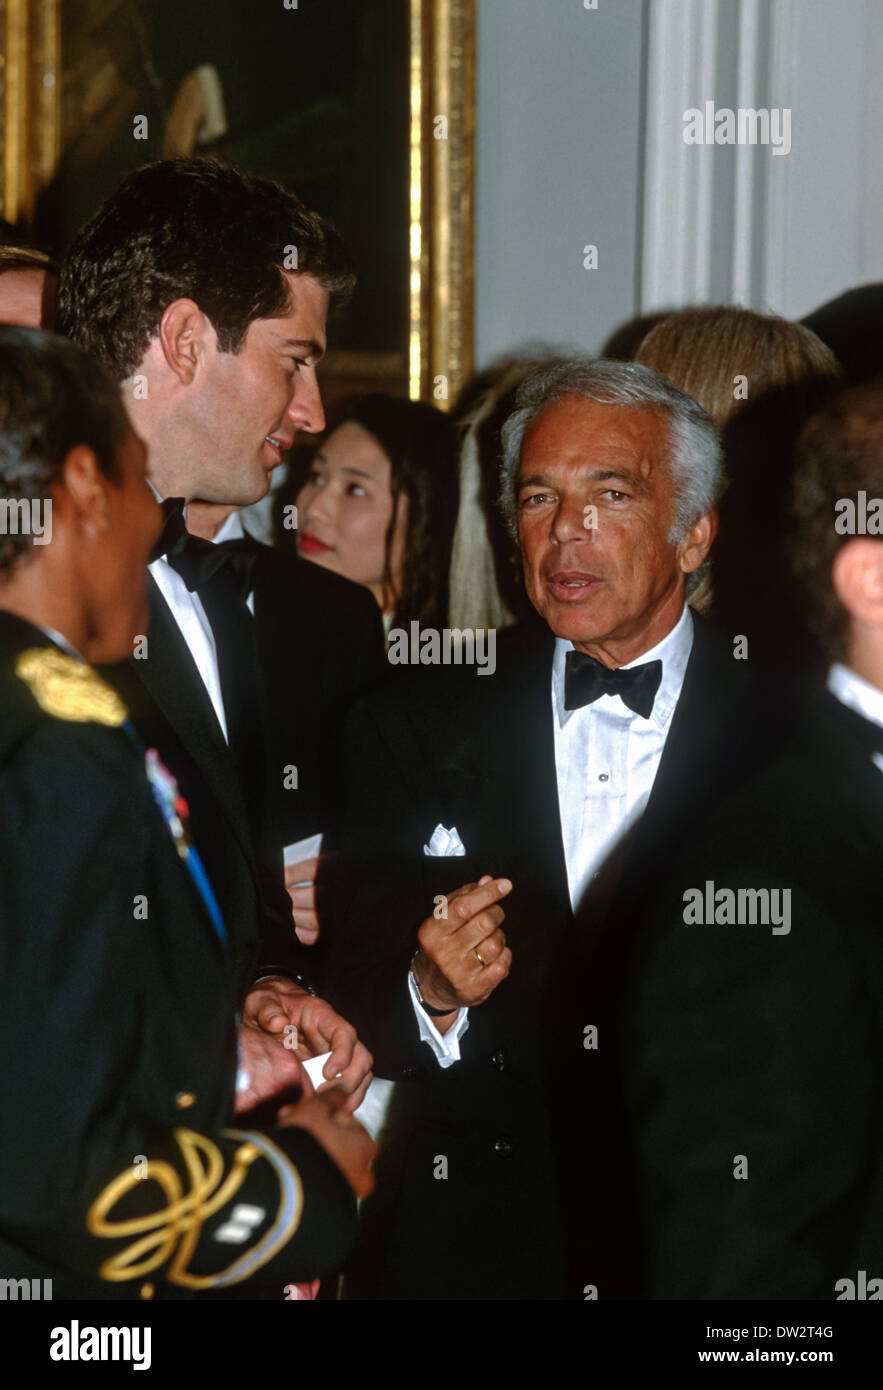 Designer Ralph Lauren speaks with John Kennedy, jr at the State Dinner for the British Prime Tony Blair Minister February 5, 1998 at the White House in Washington, DC. Stock Photo